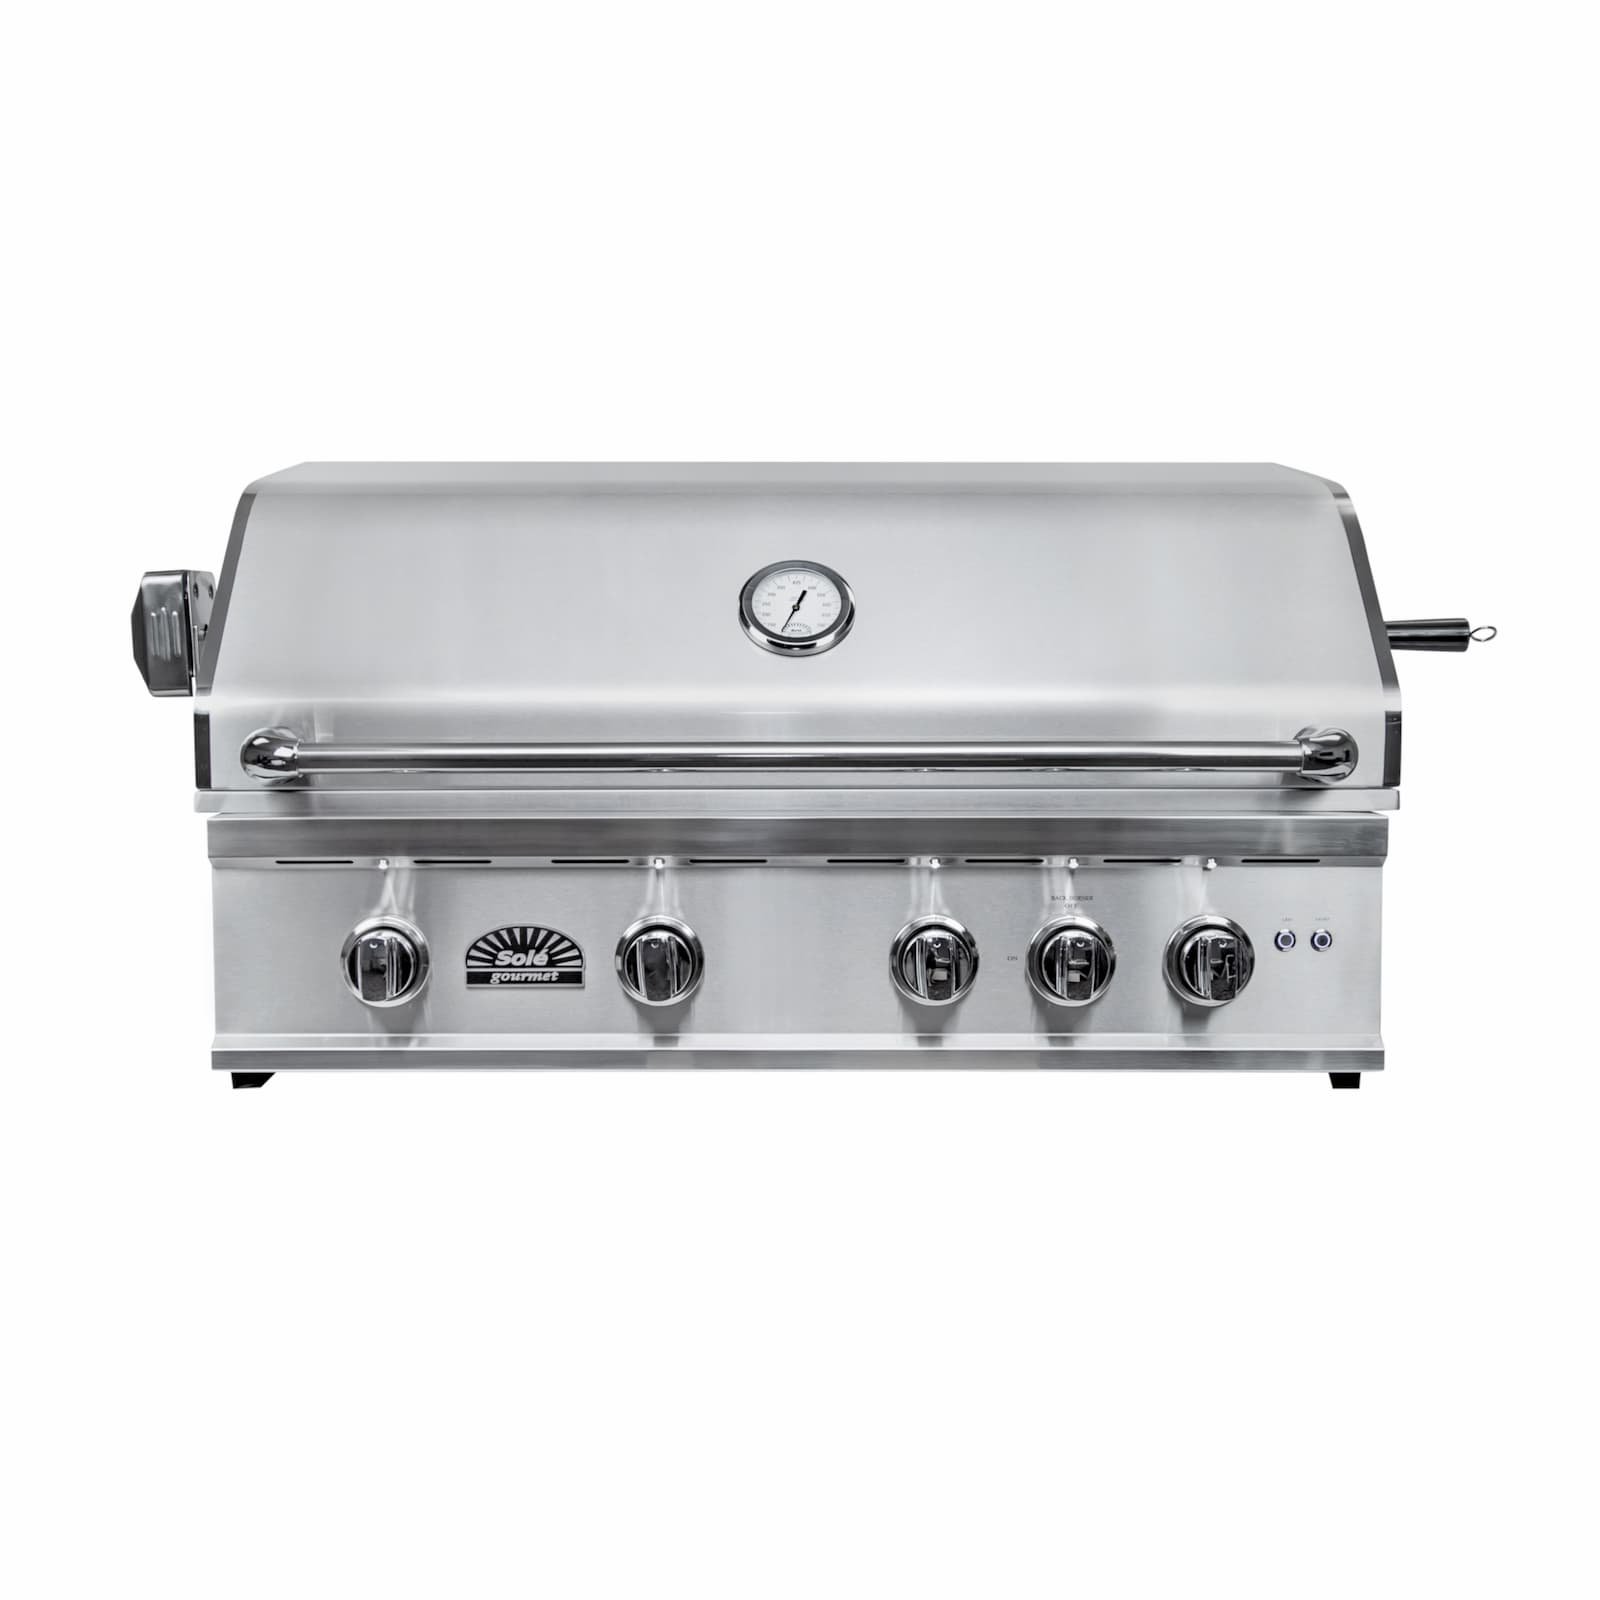 beetje top Chemicaliën 38″ TR Series Build-in Grill with LED Controls – Solé Gourmet